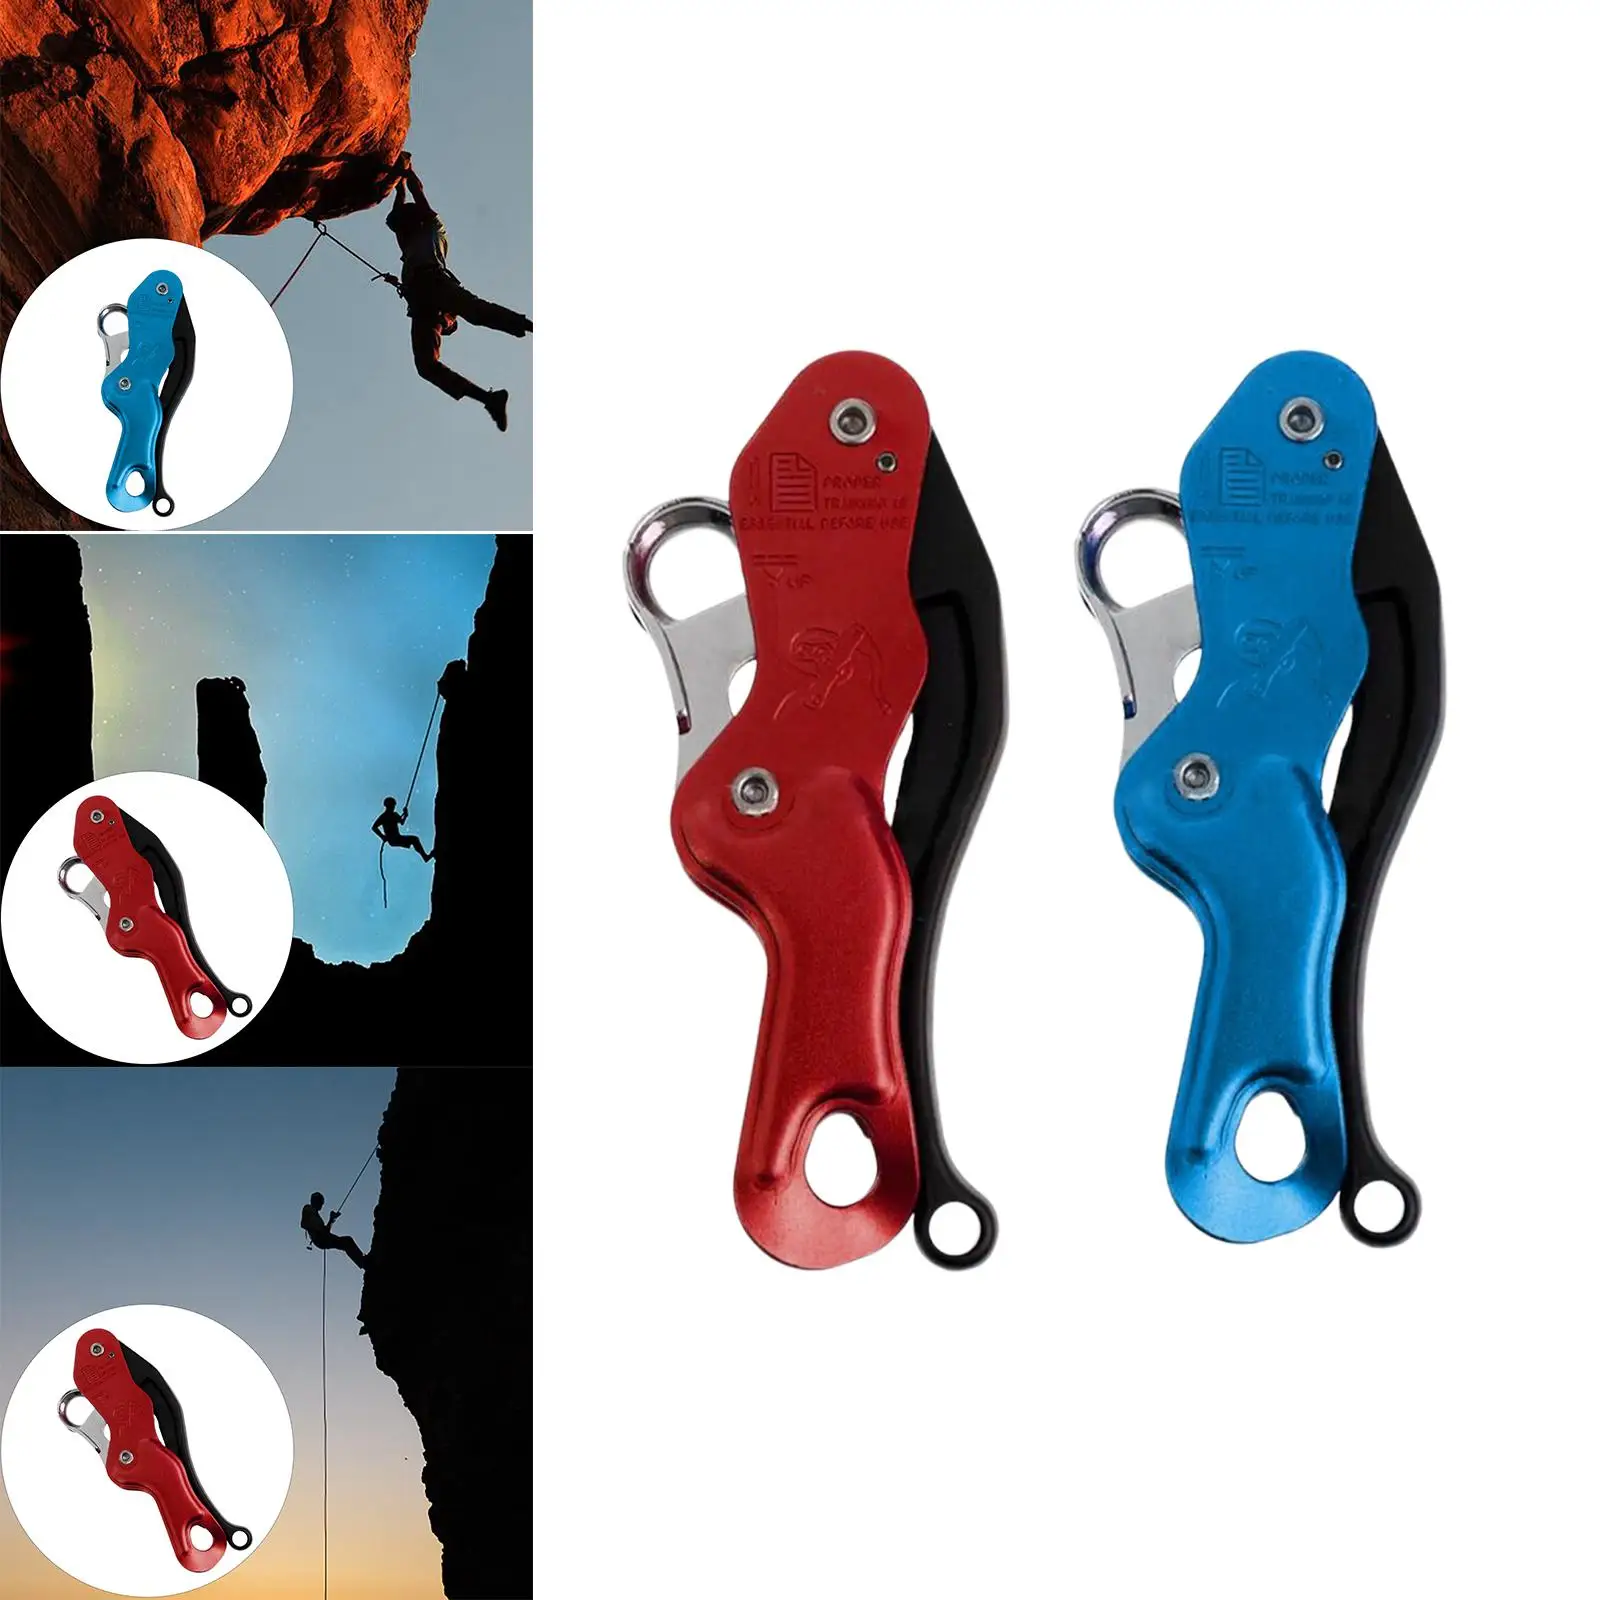 Climbing Stop Descender, Self Braking Belay Device Rappelling Gear Rope Grab Belaying Abseiling for Rock Climbing Outdoor